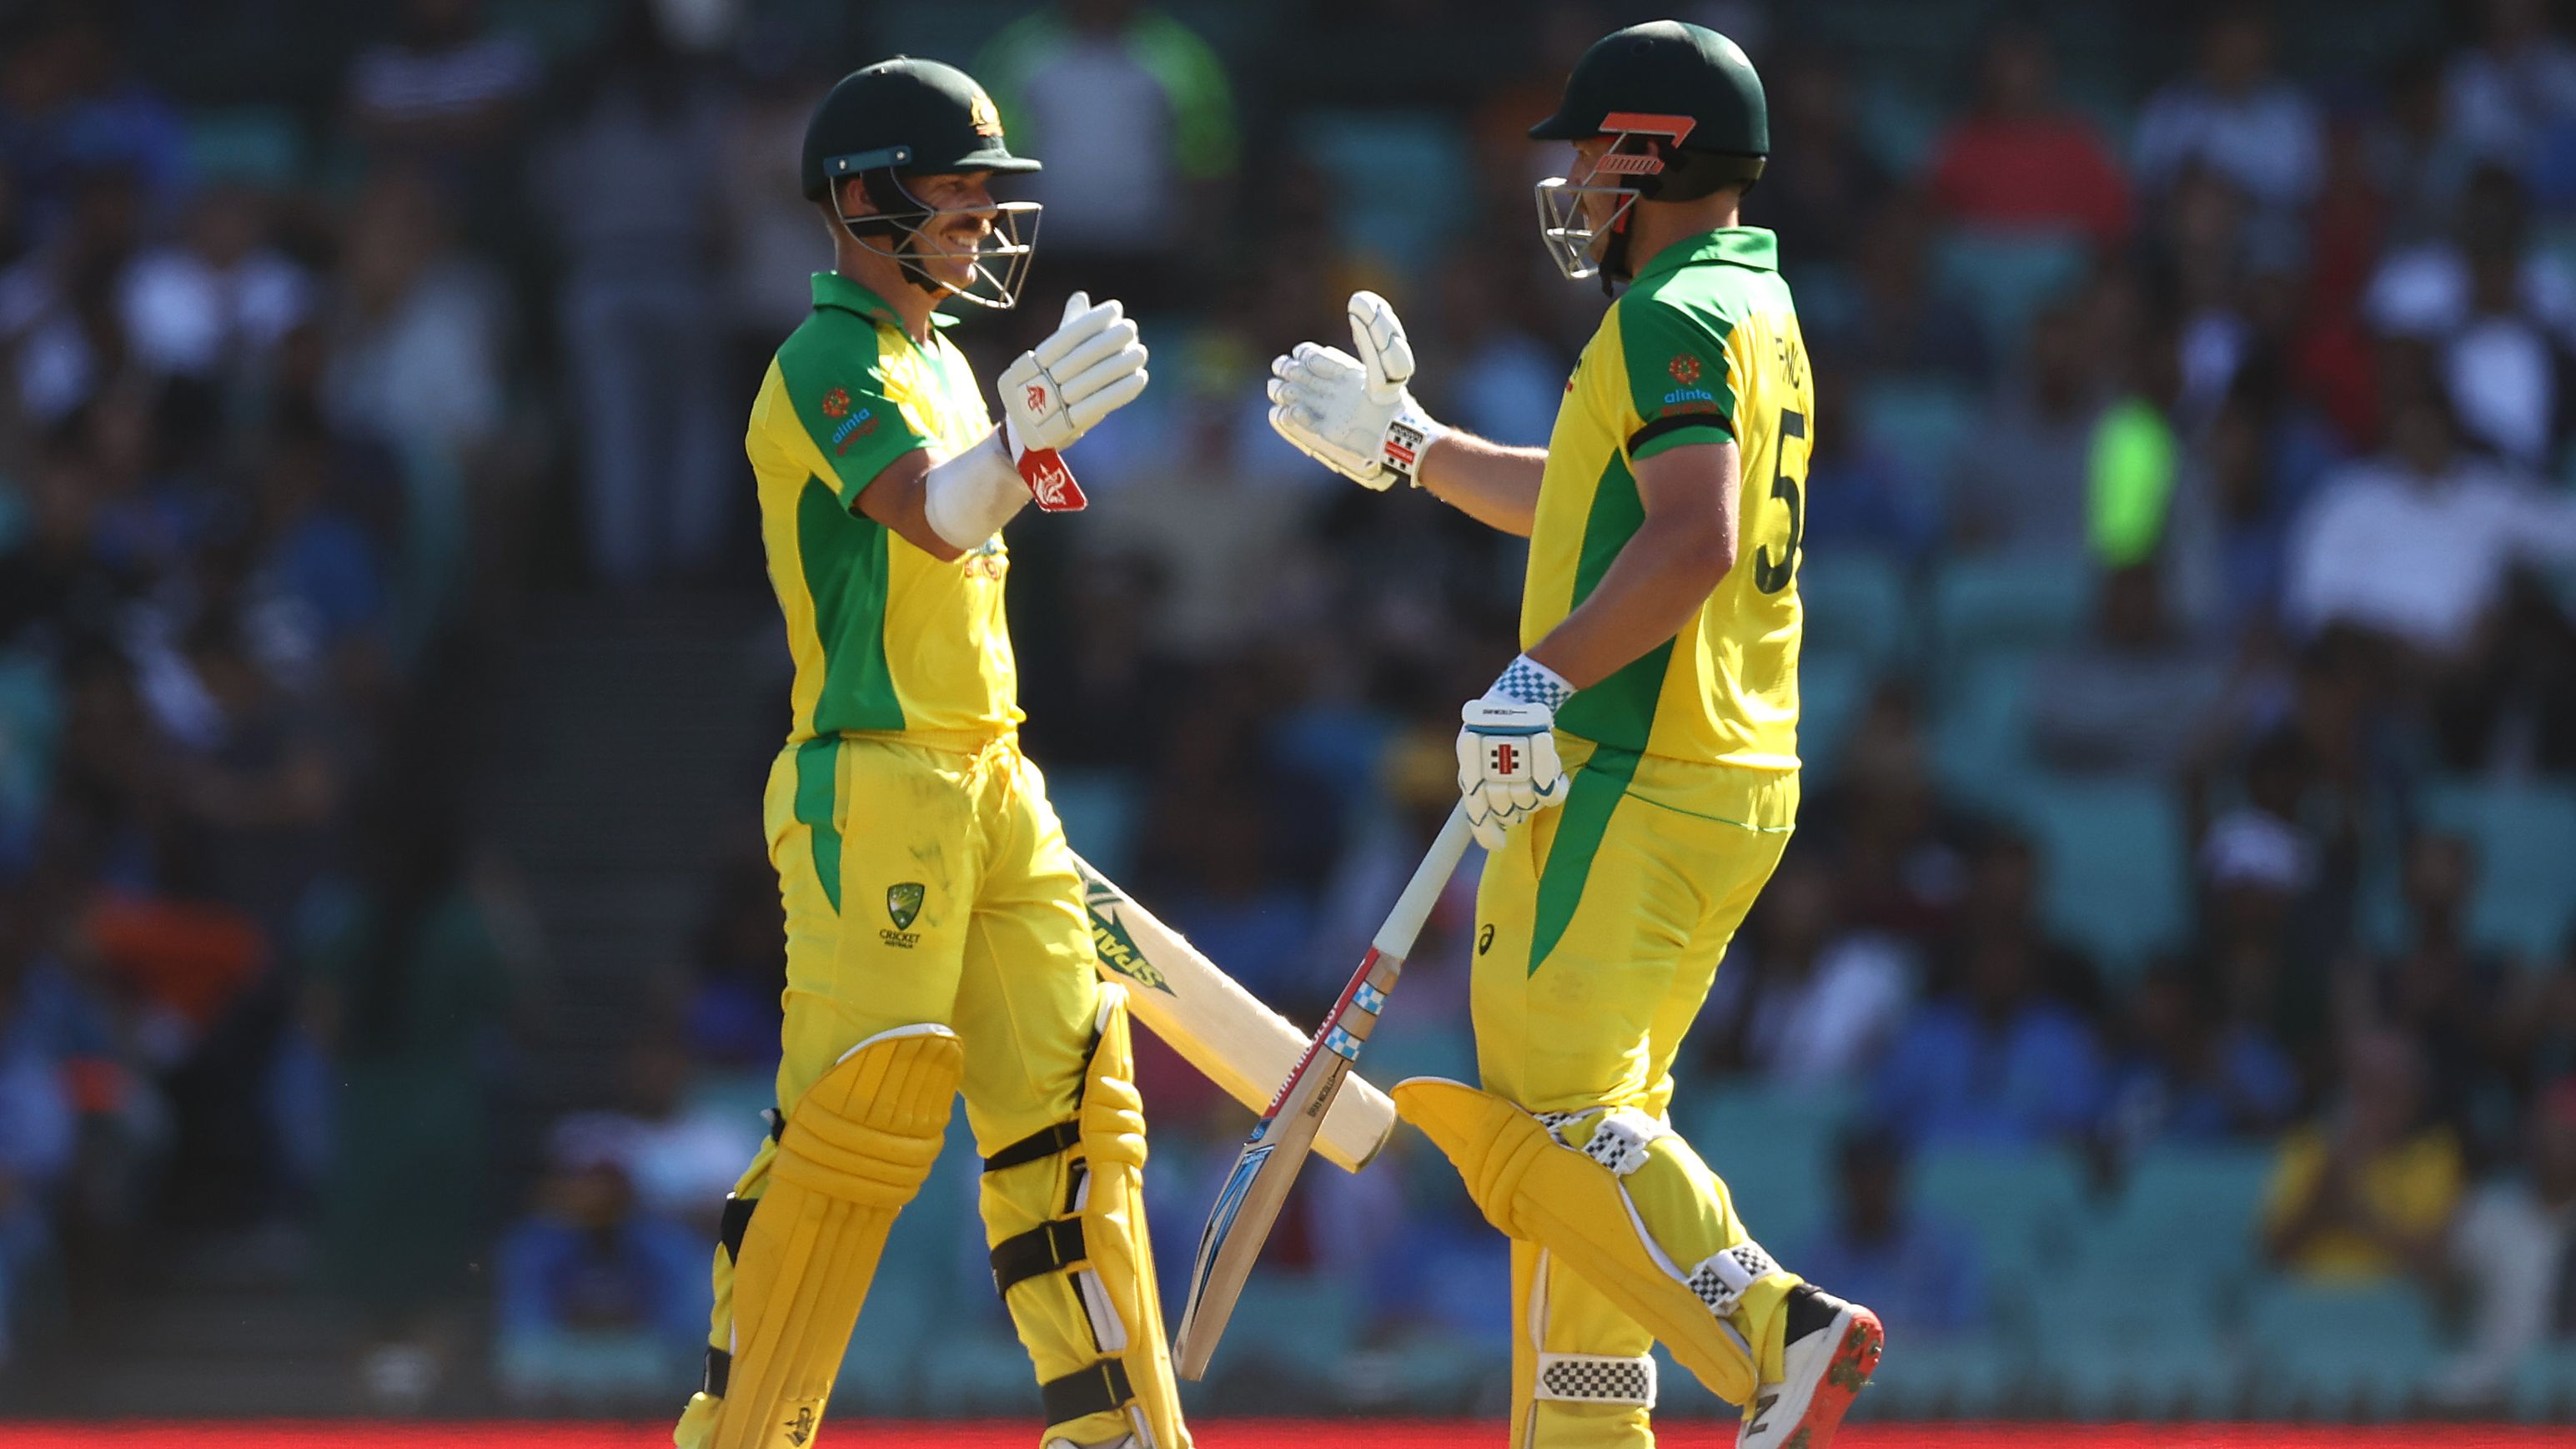 David Warner and Aaron Finch celebrate after reaching their 150 run partnership.